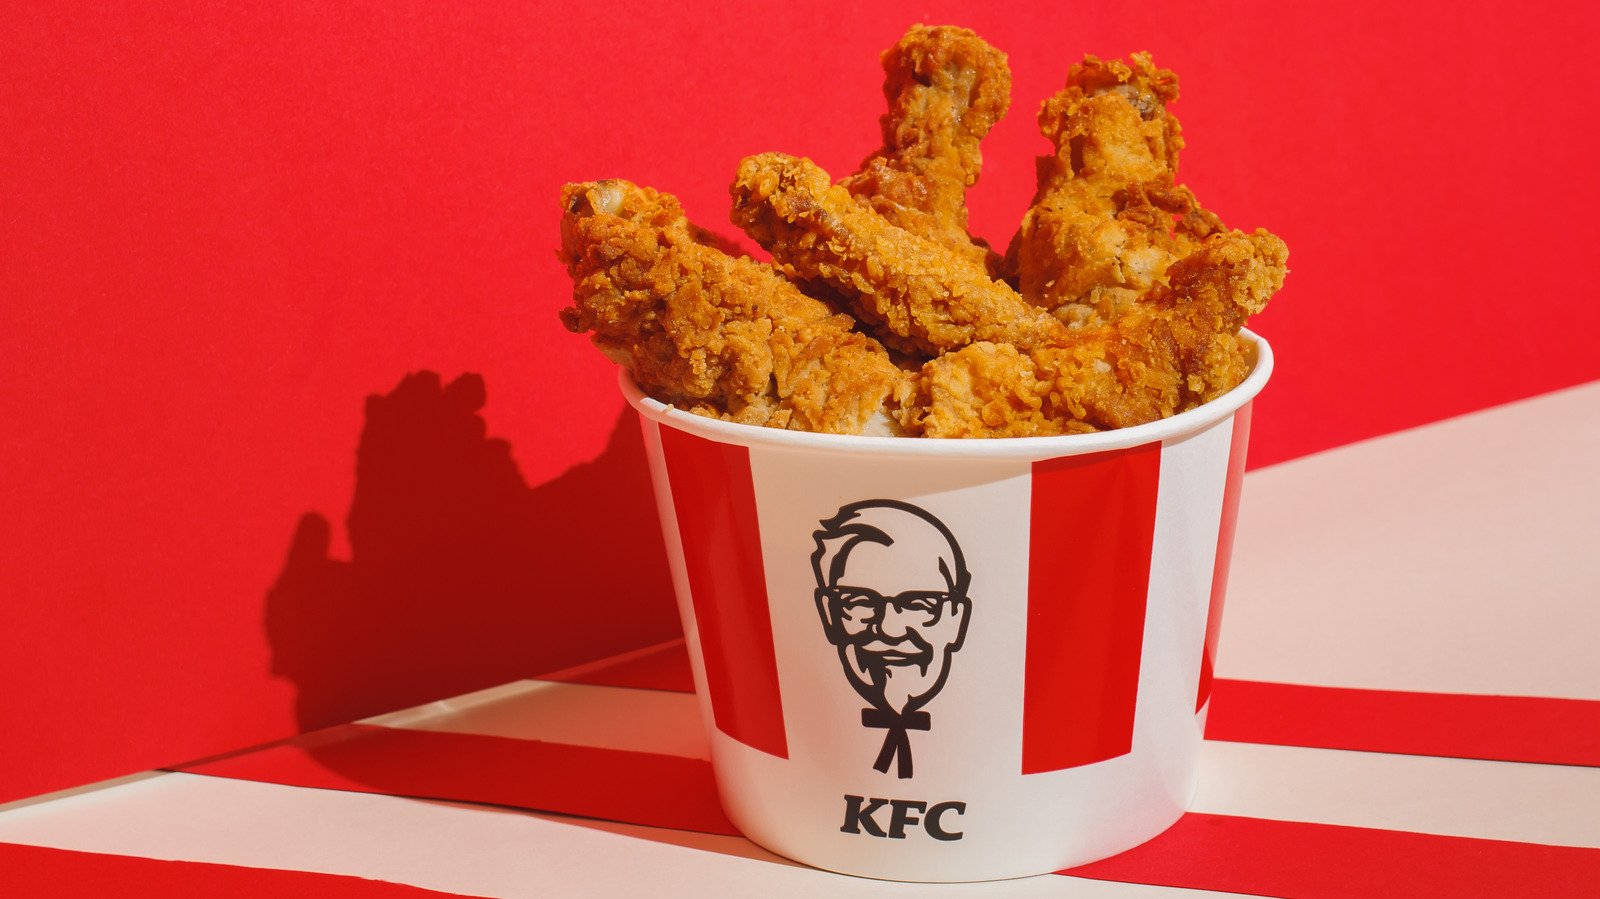 The KFC Xbox Controller You Never Knew Existed